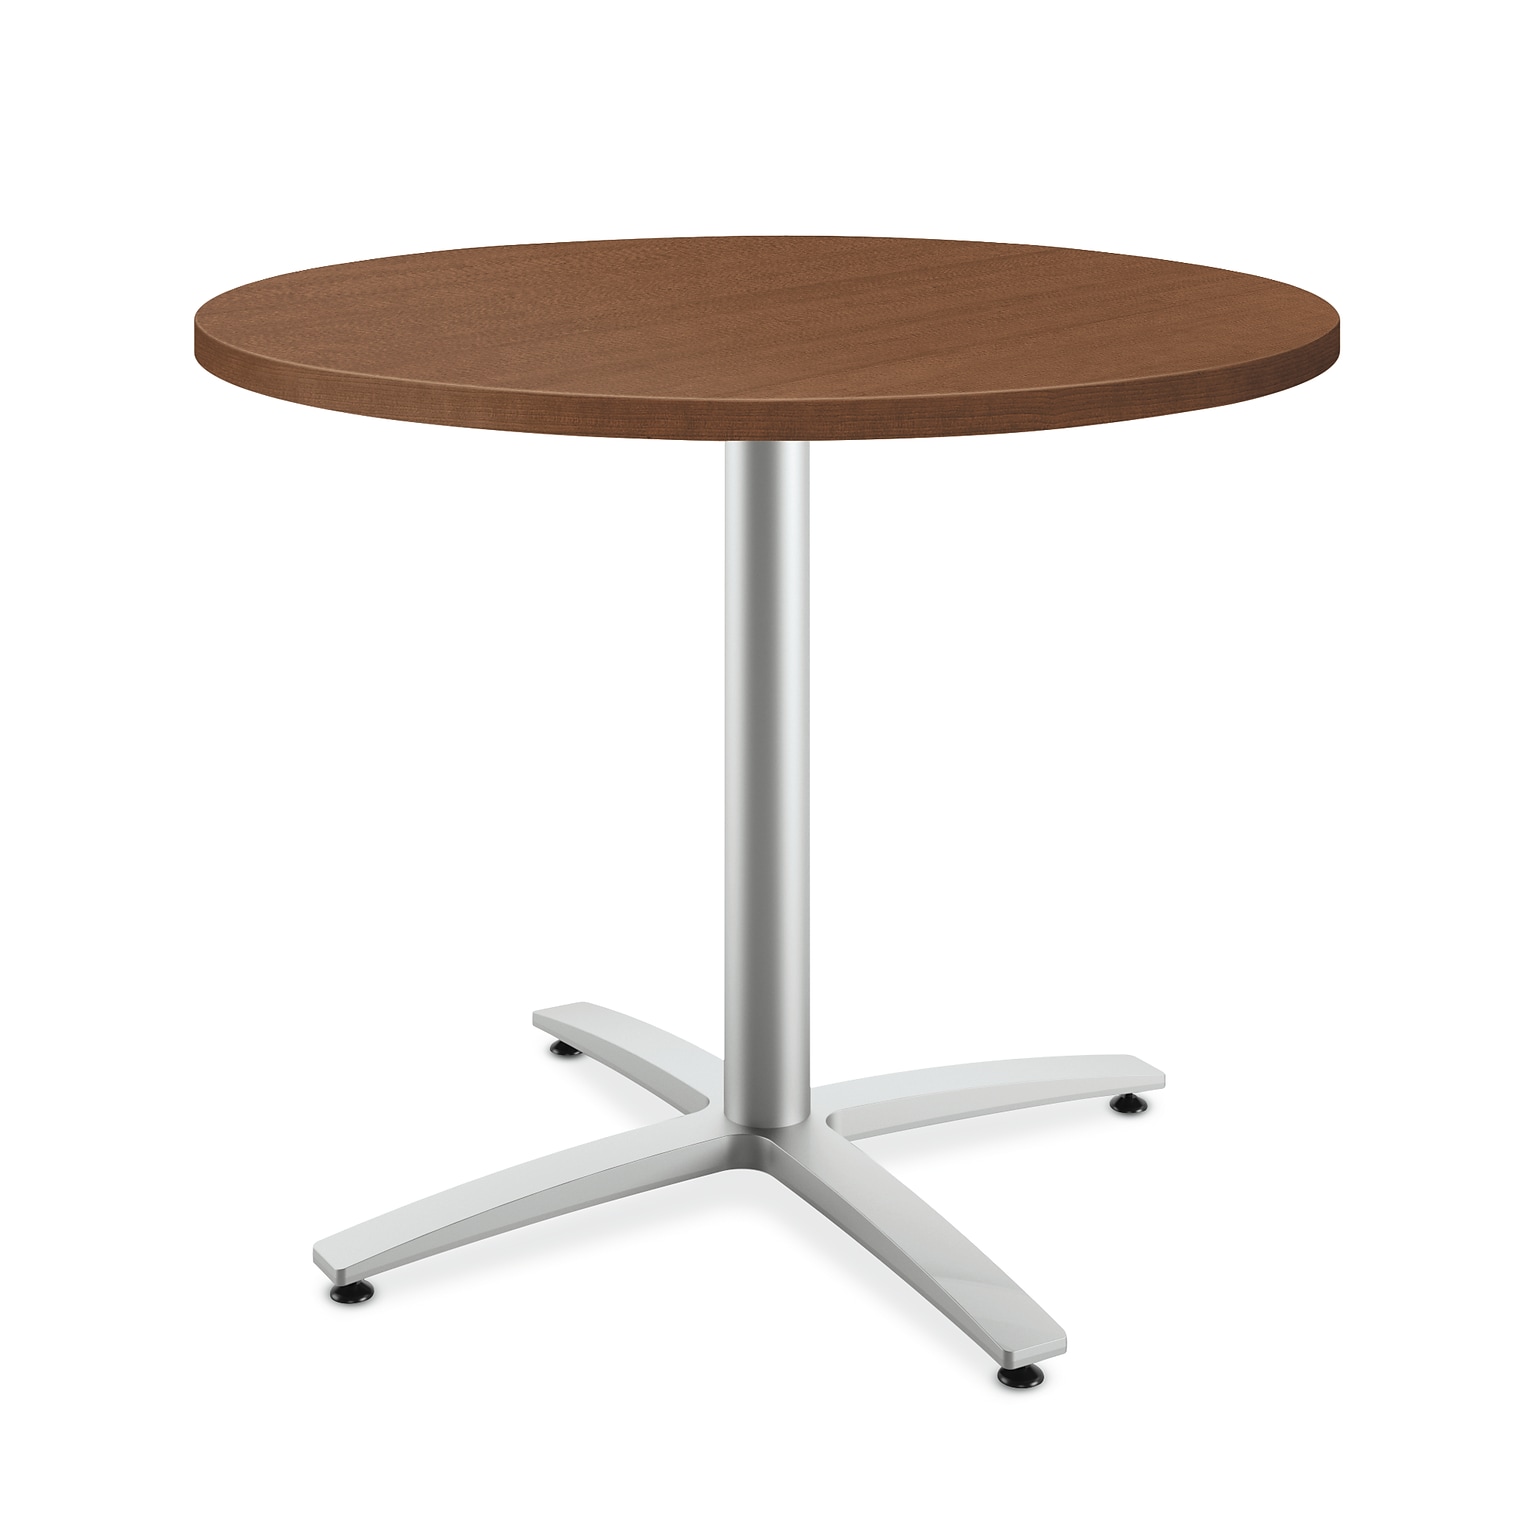 HON Between Round Table, Seated Height X-Base, 36D, Shaker Cherry Laminate/Textured Silver Finish